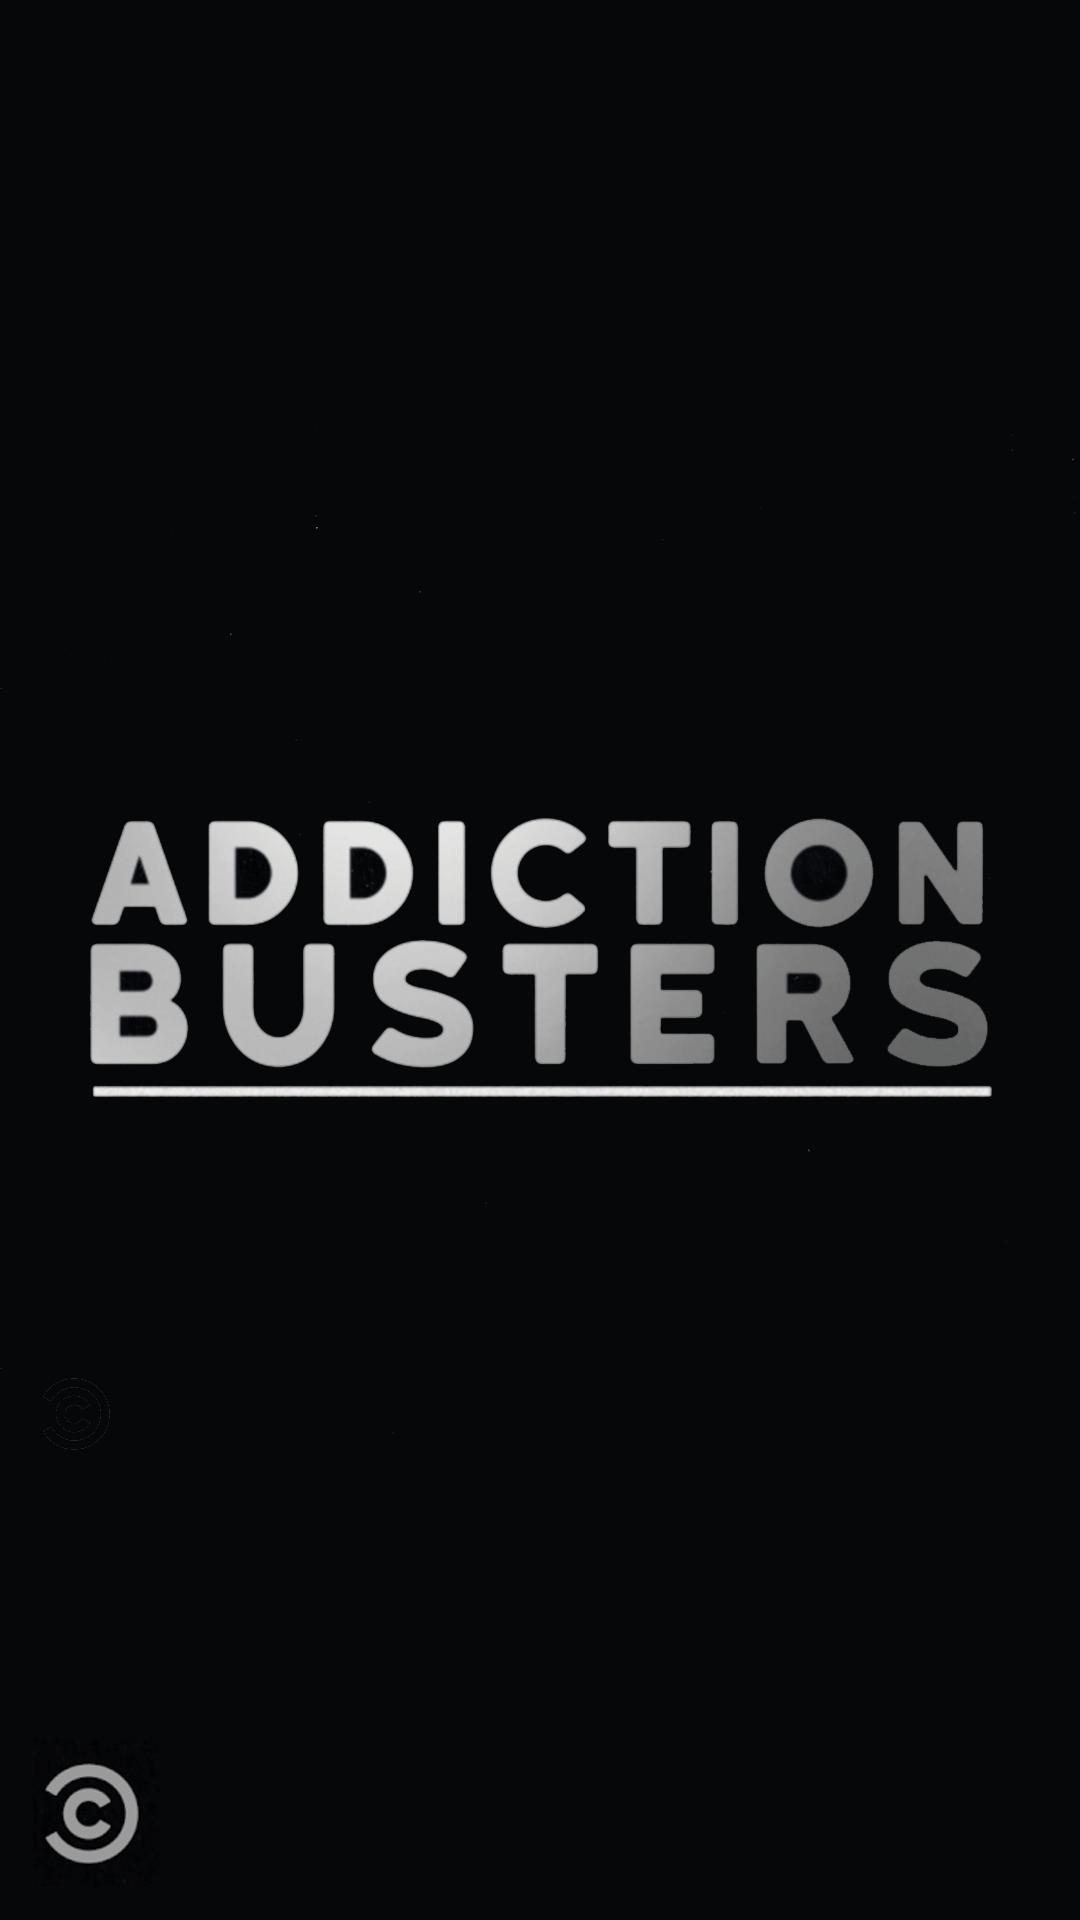 Addiction Busters